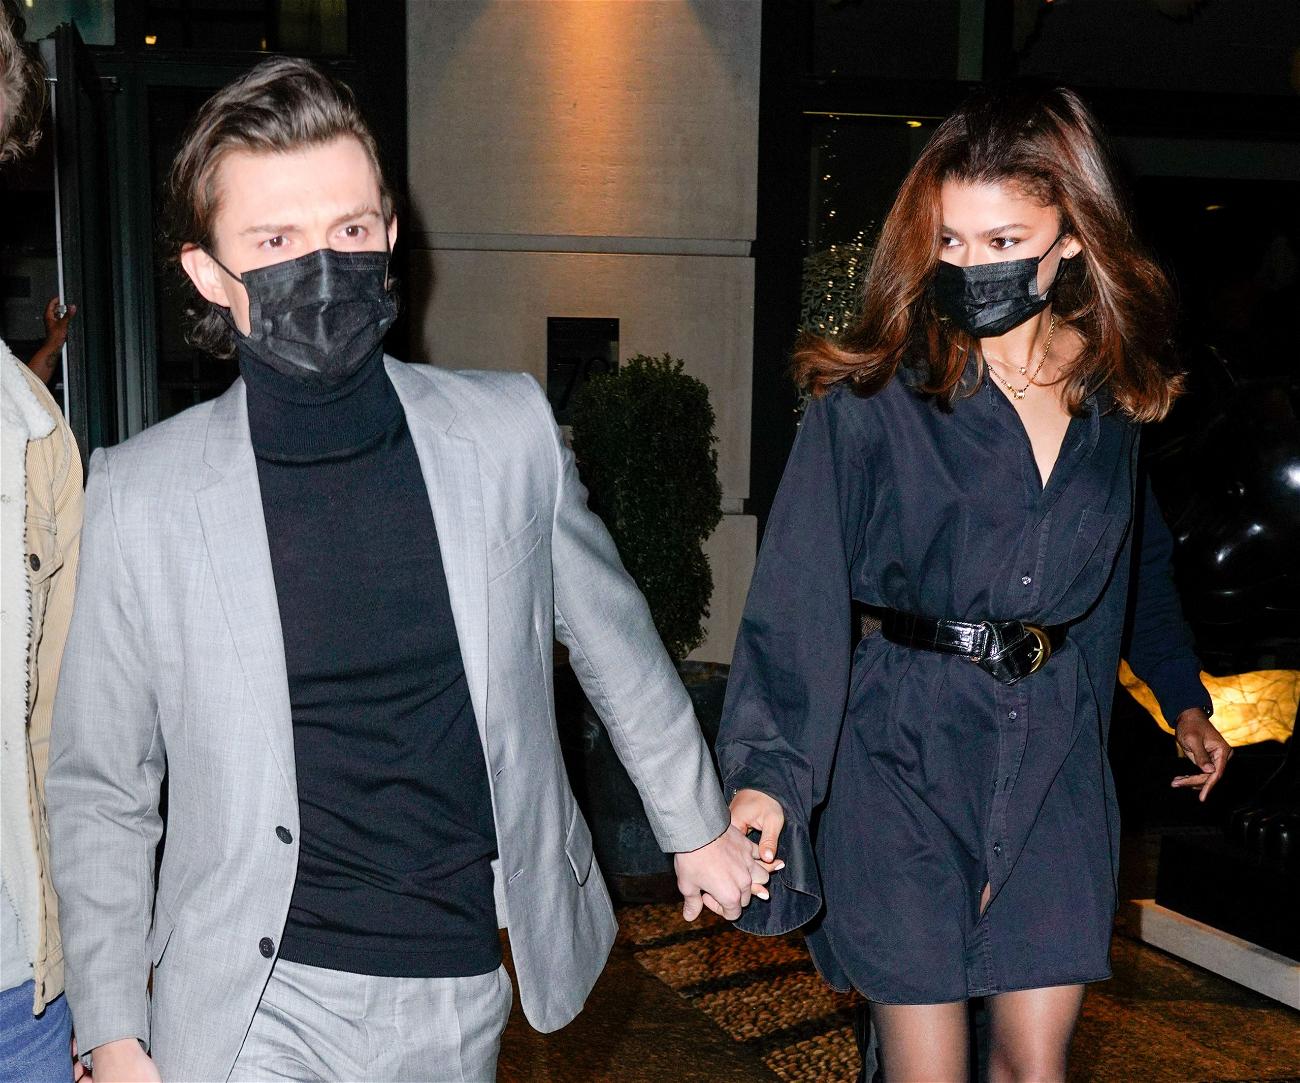 Tom Holland and Zendaya hold hands as they leave their hotel in New York